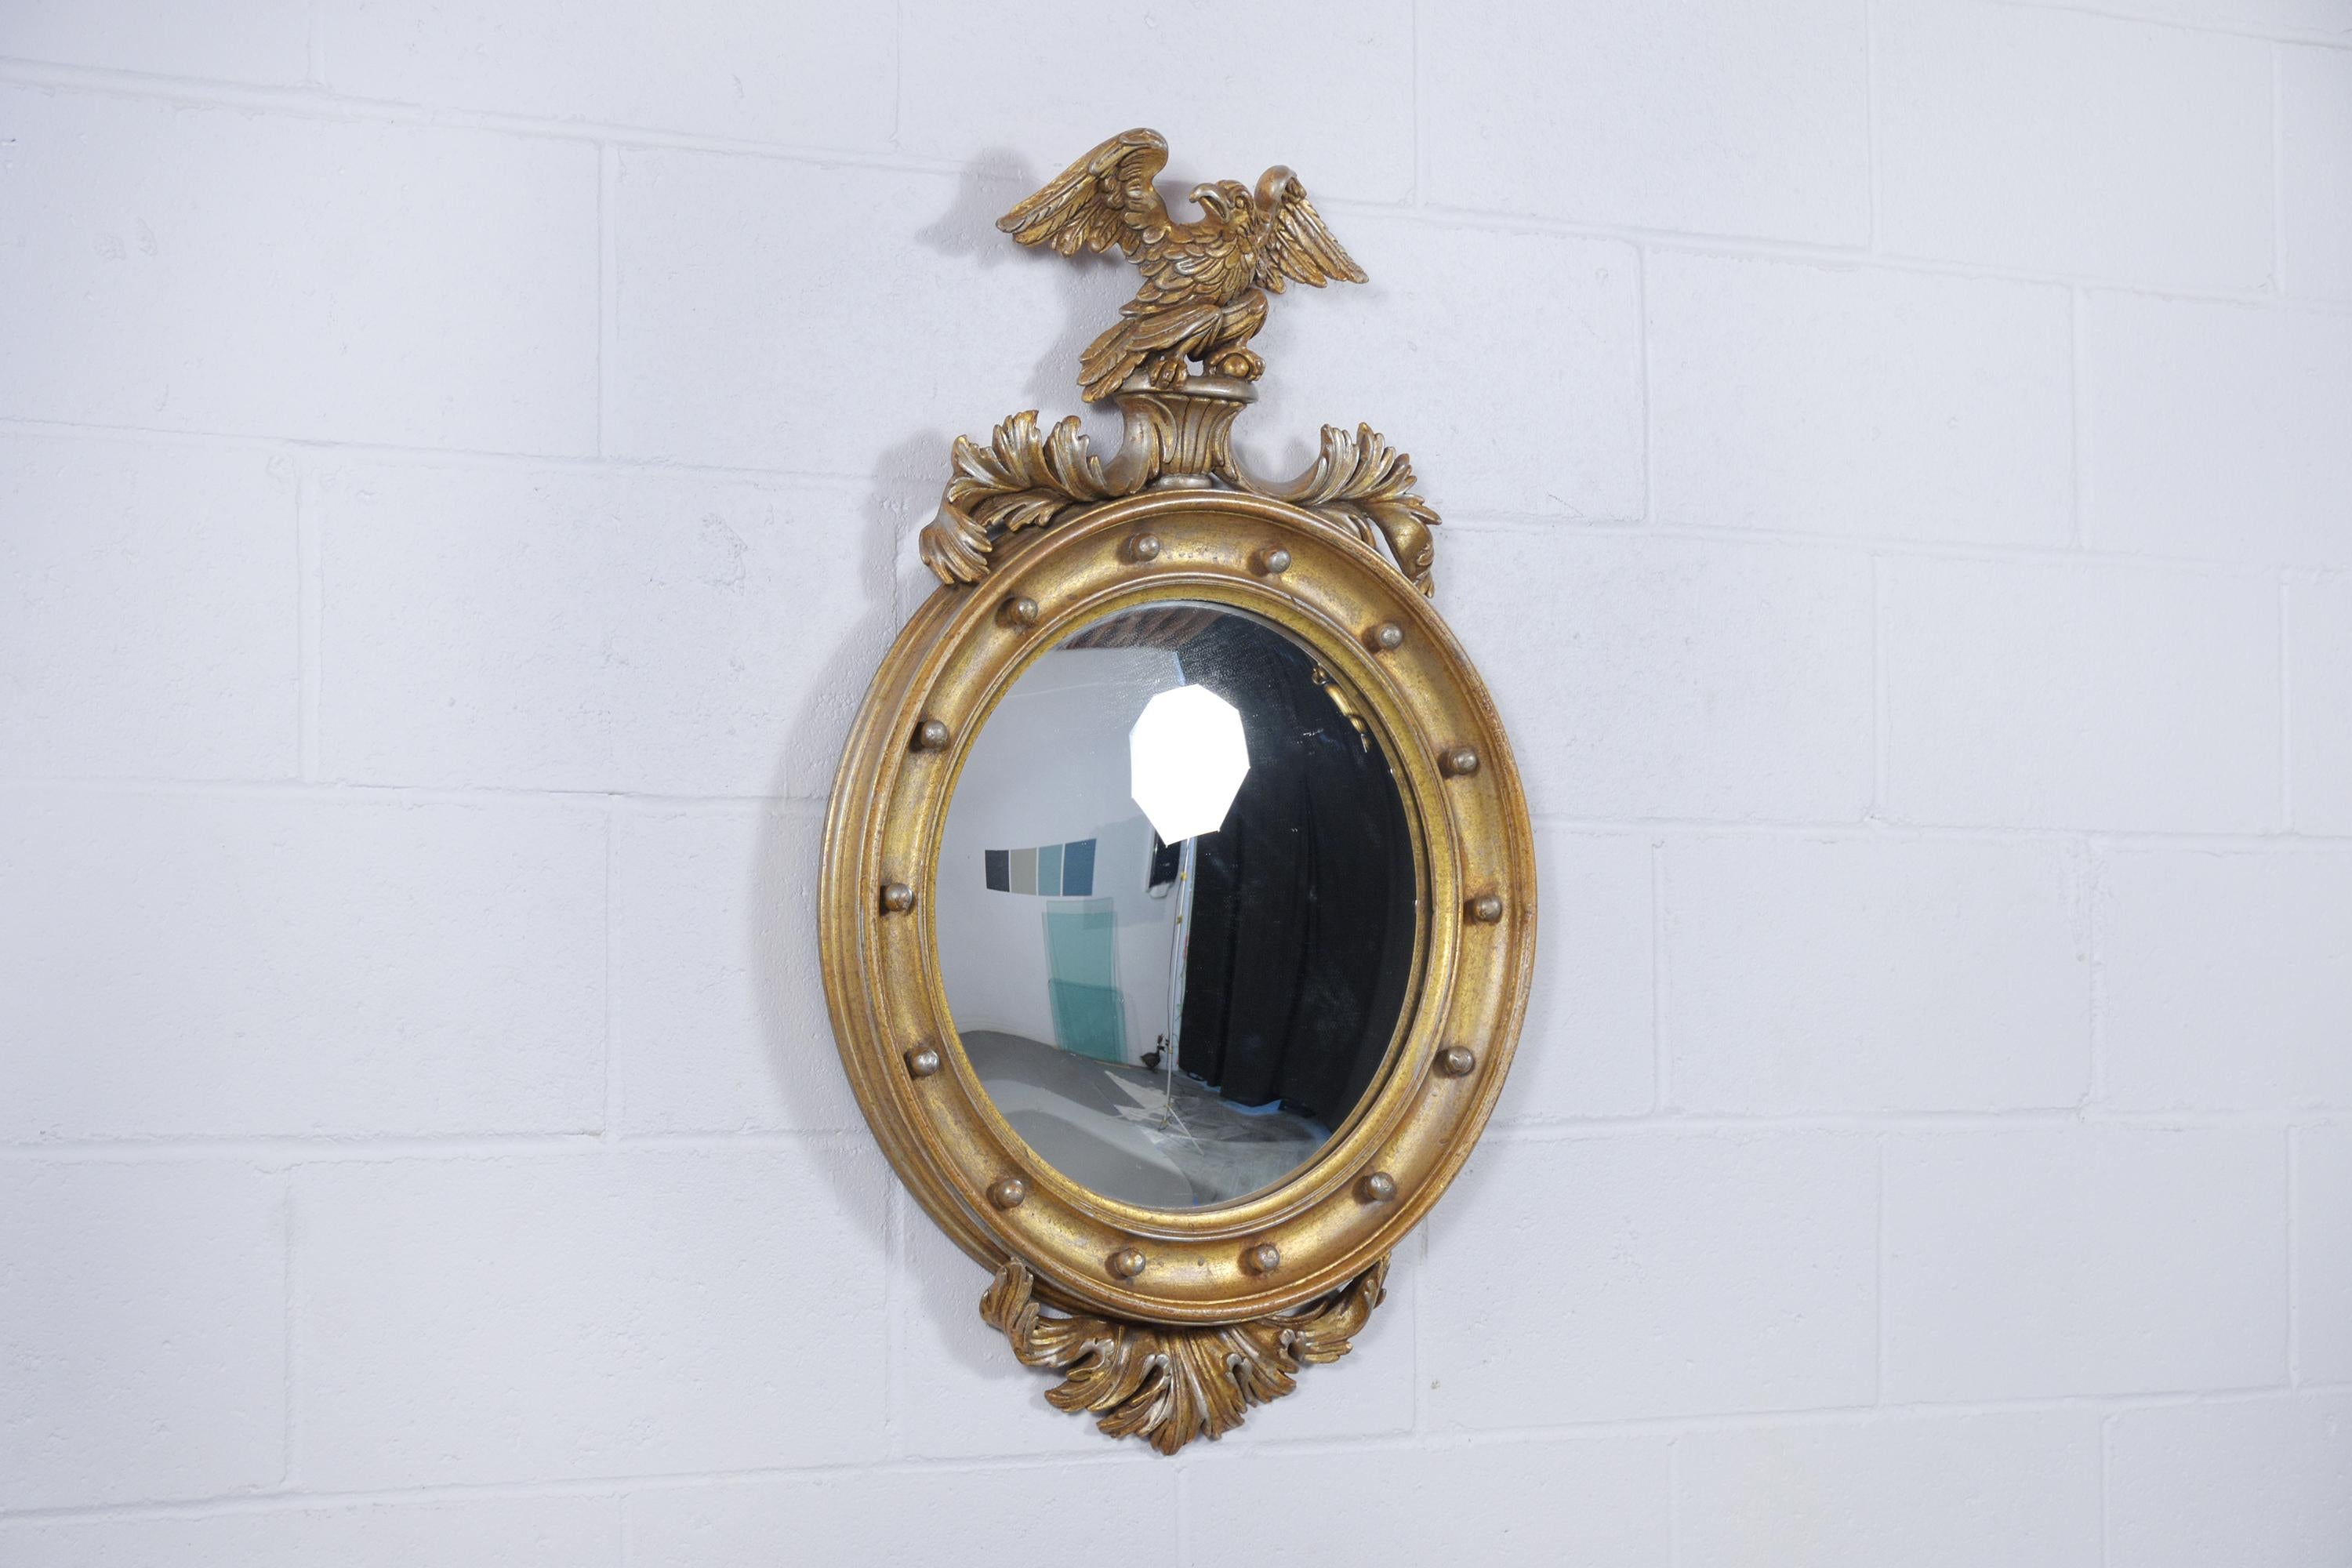 Immerse yourself in the sophistication of our vintage Italian American Federal-style oval wall mirror. This exquisite piece is hand-crafted from premium maple wood, demonstrating the finesse and skill of traditional craftsmanship. Measuring 15.25